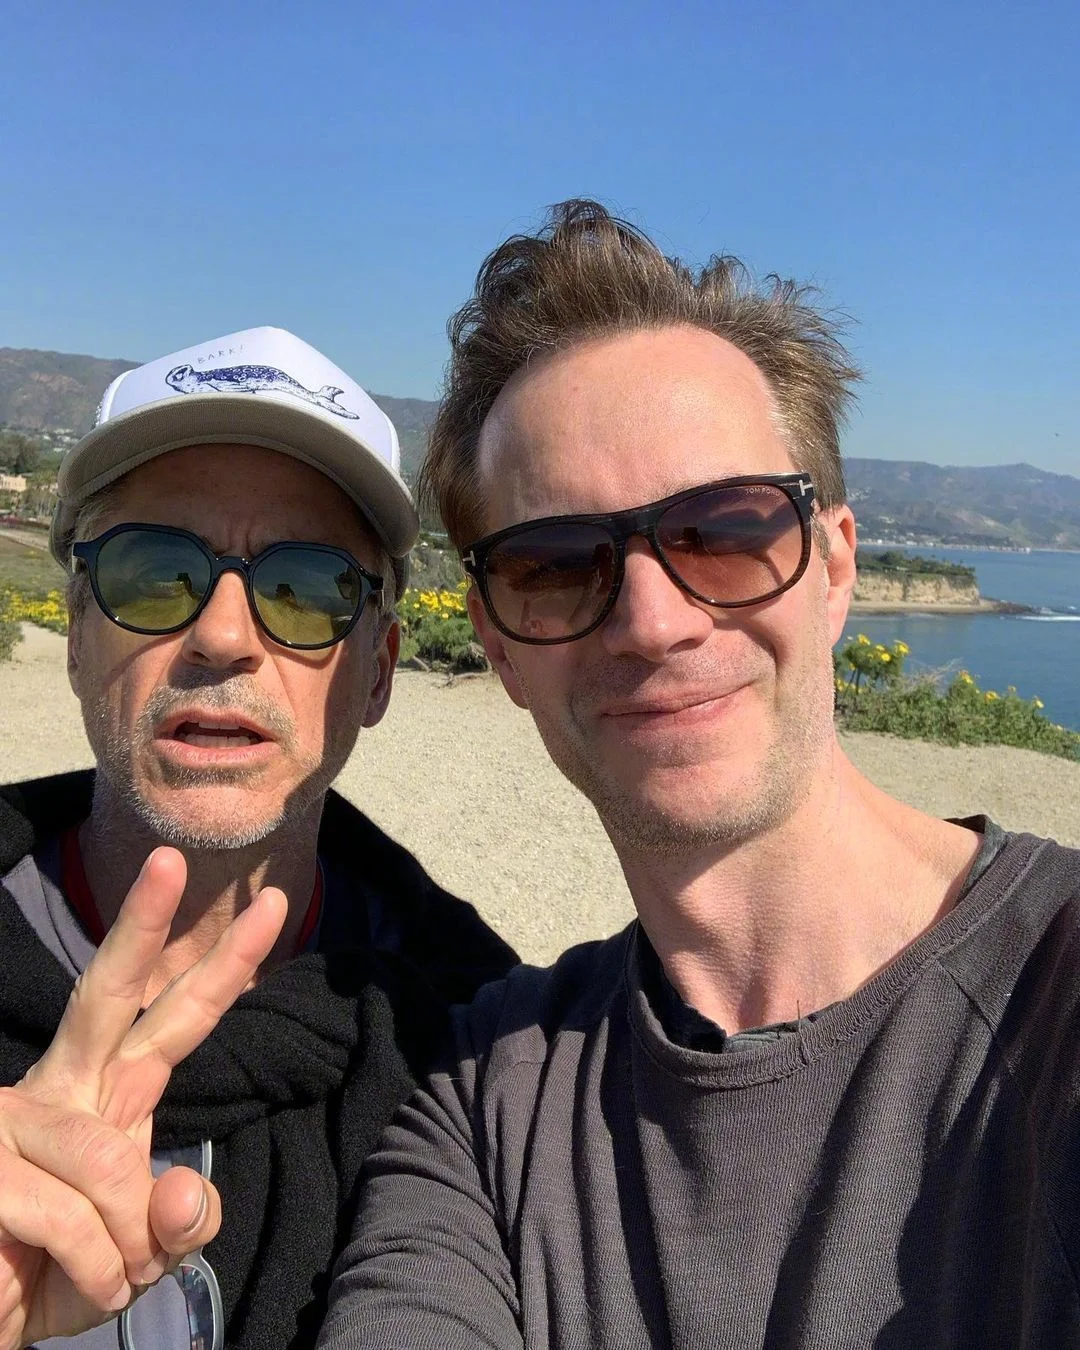 Robert Downey Jr. and James D'Arcy recently hiked together and posted a group photo